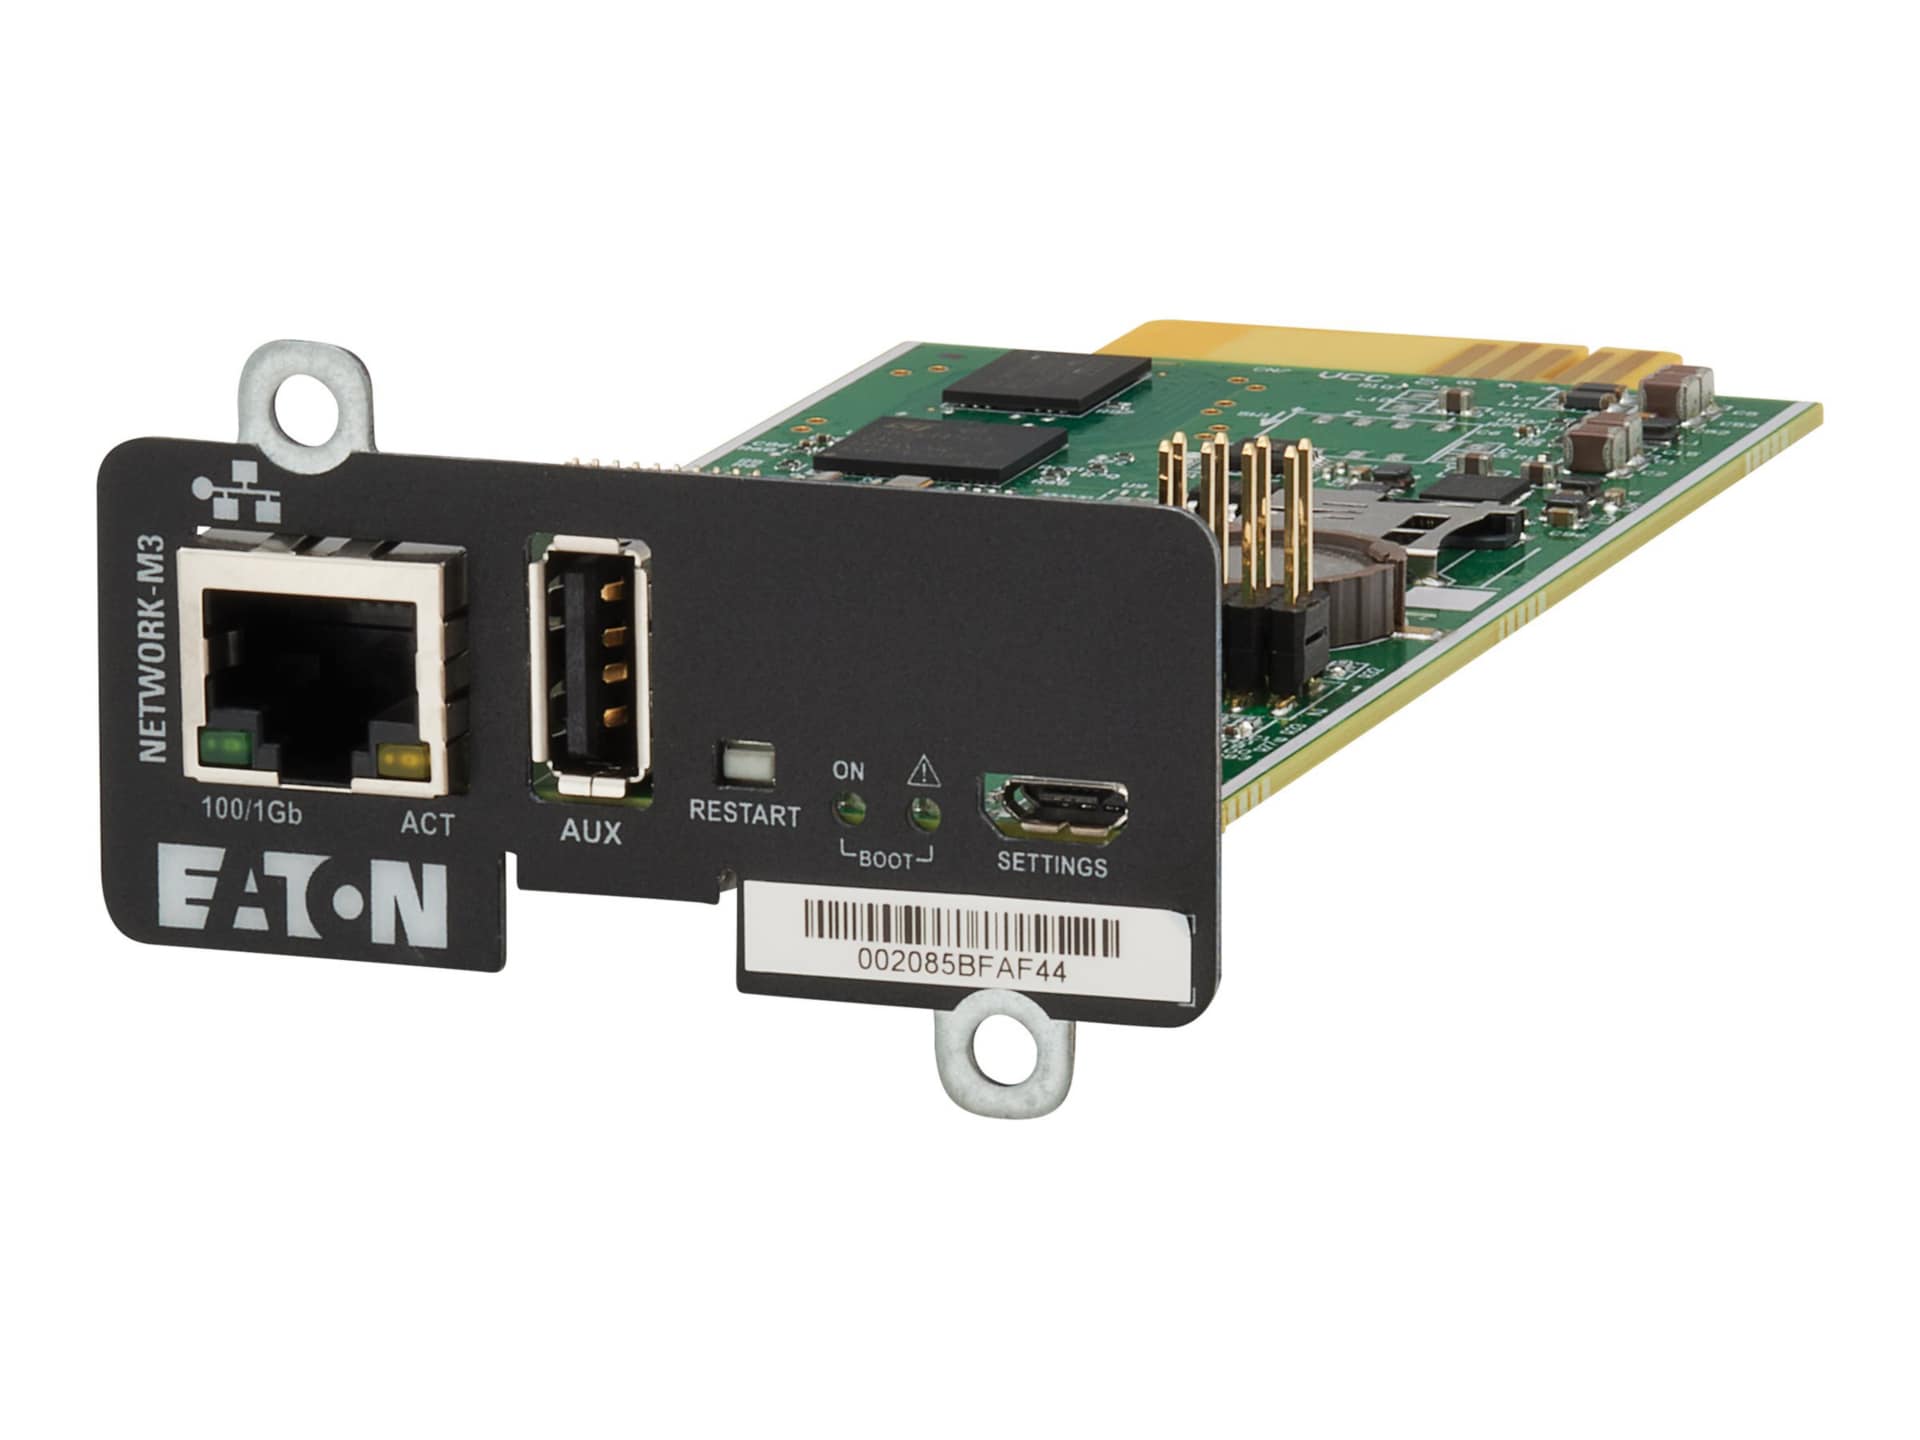 Eaton Cybersecure Gigabit NETWORK-M3 Card for UPS and PDU, UL 2900-1 and IEC 62443-4-2 Certified